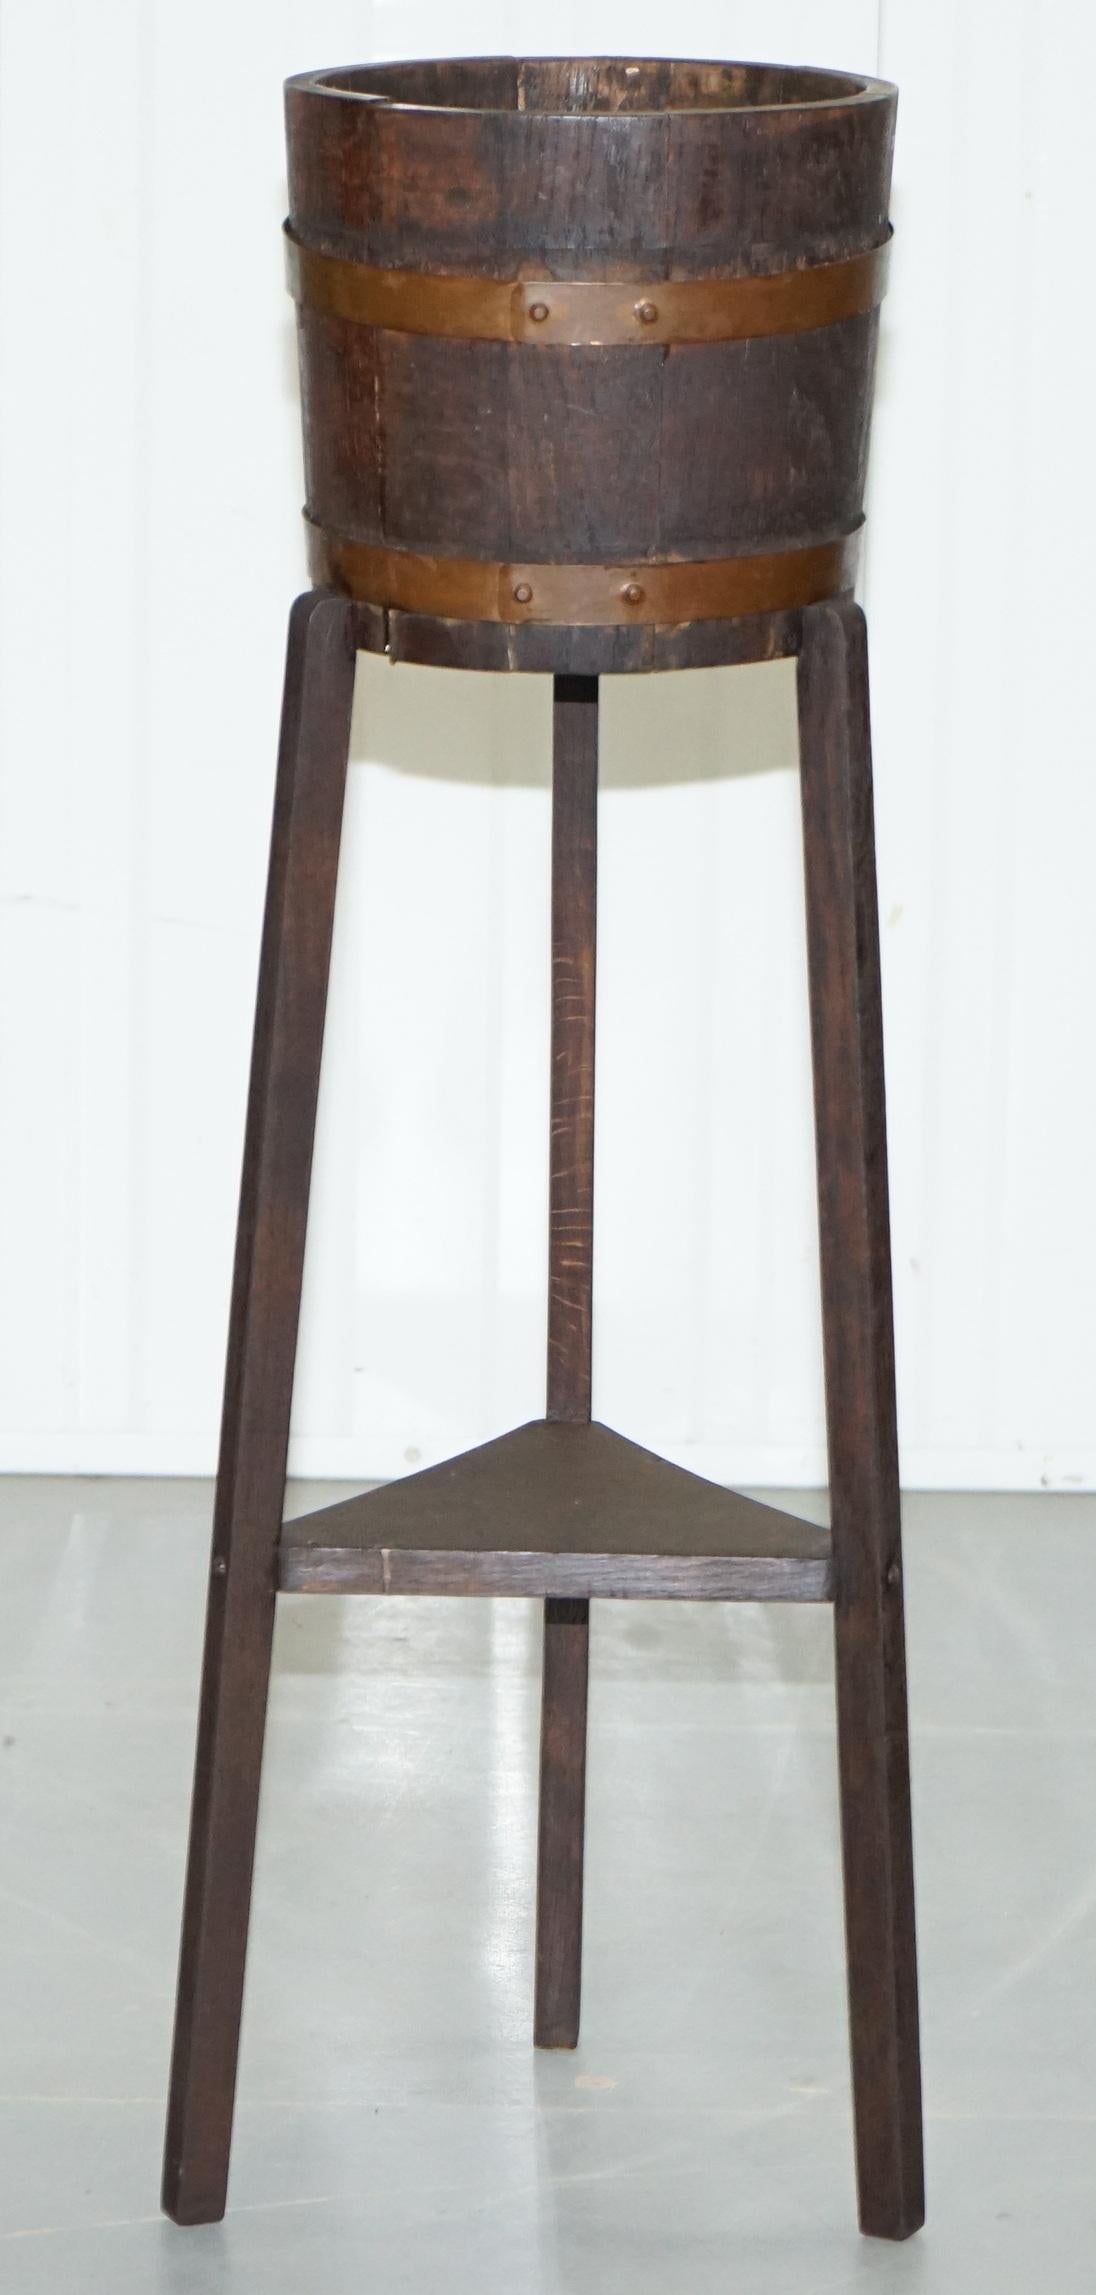 Restored Pair of R A Lister & Co Plant Stands Lovely Barrel Design, circa 1900 1